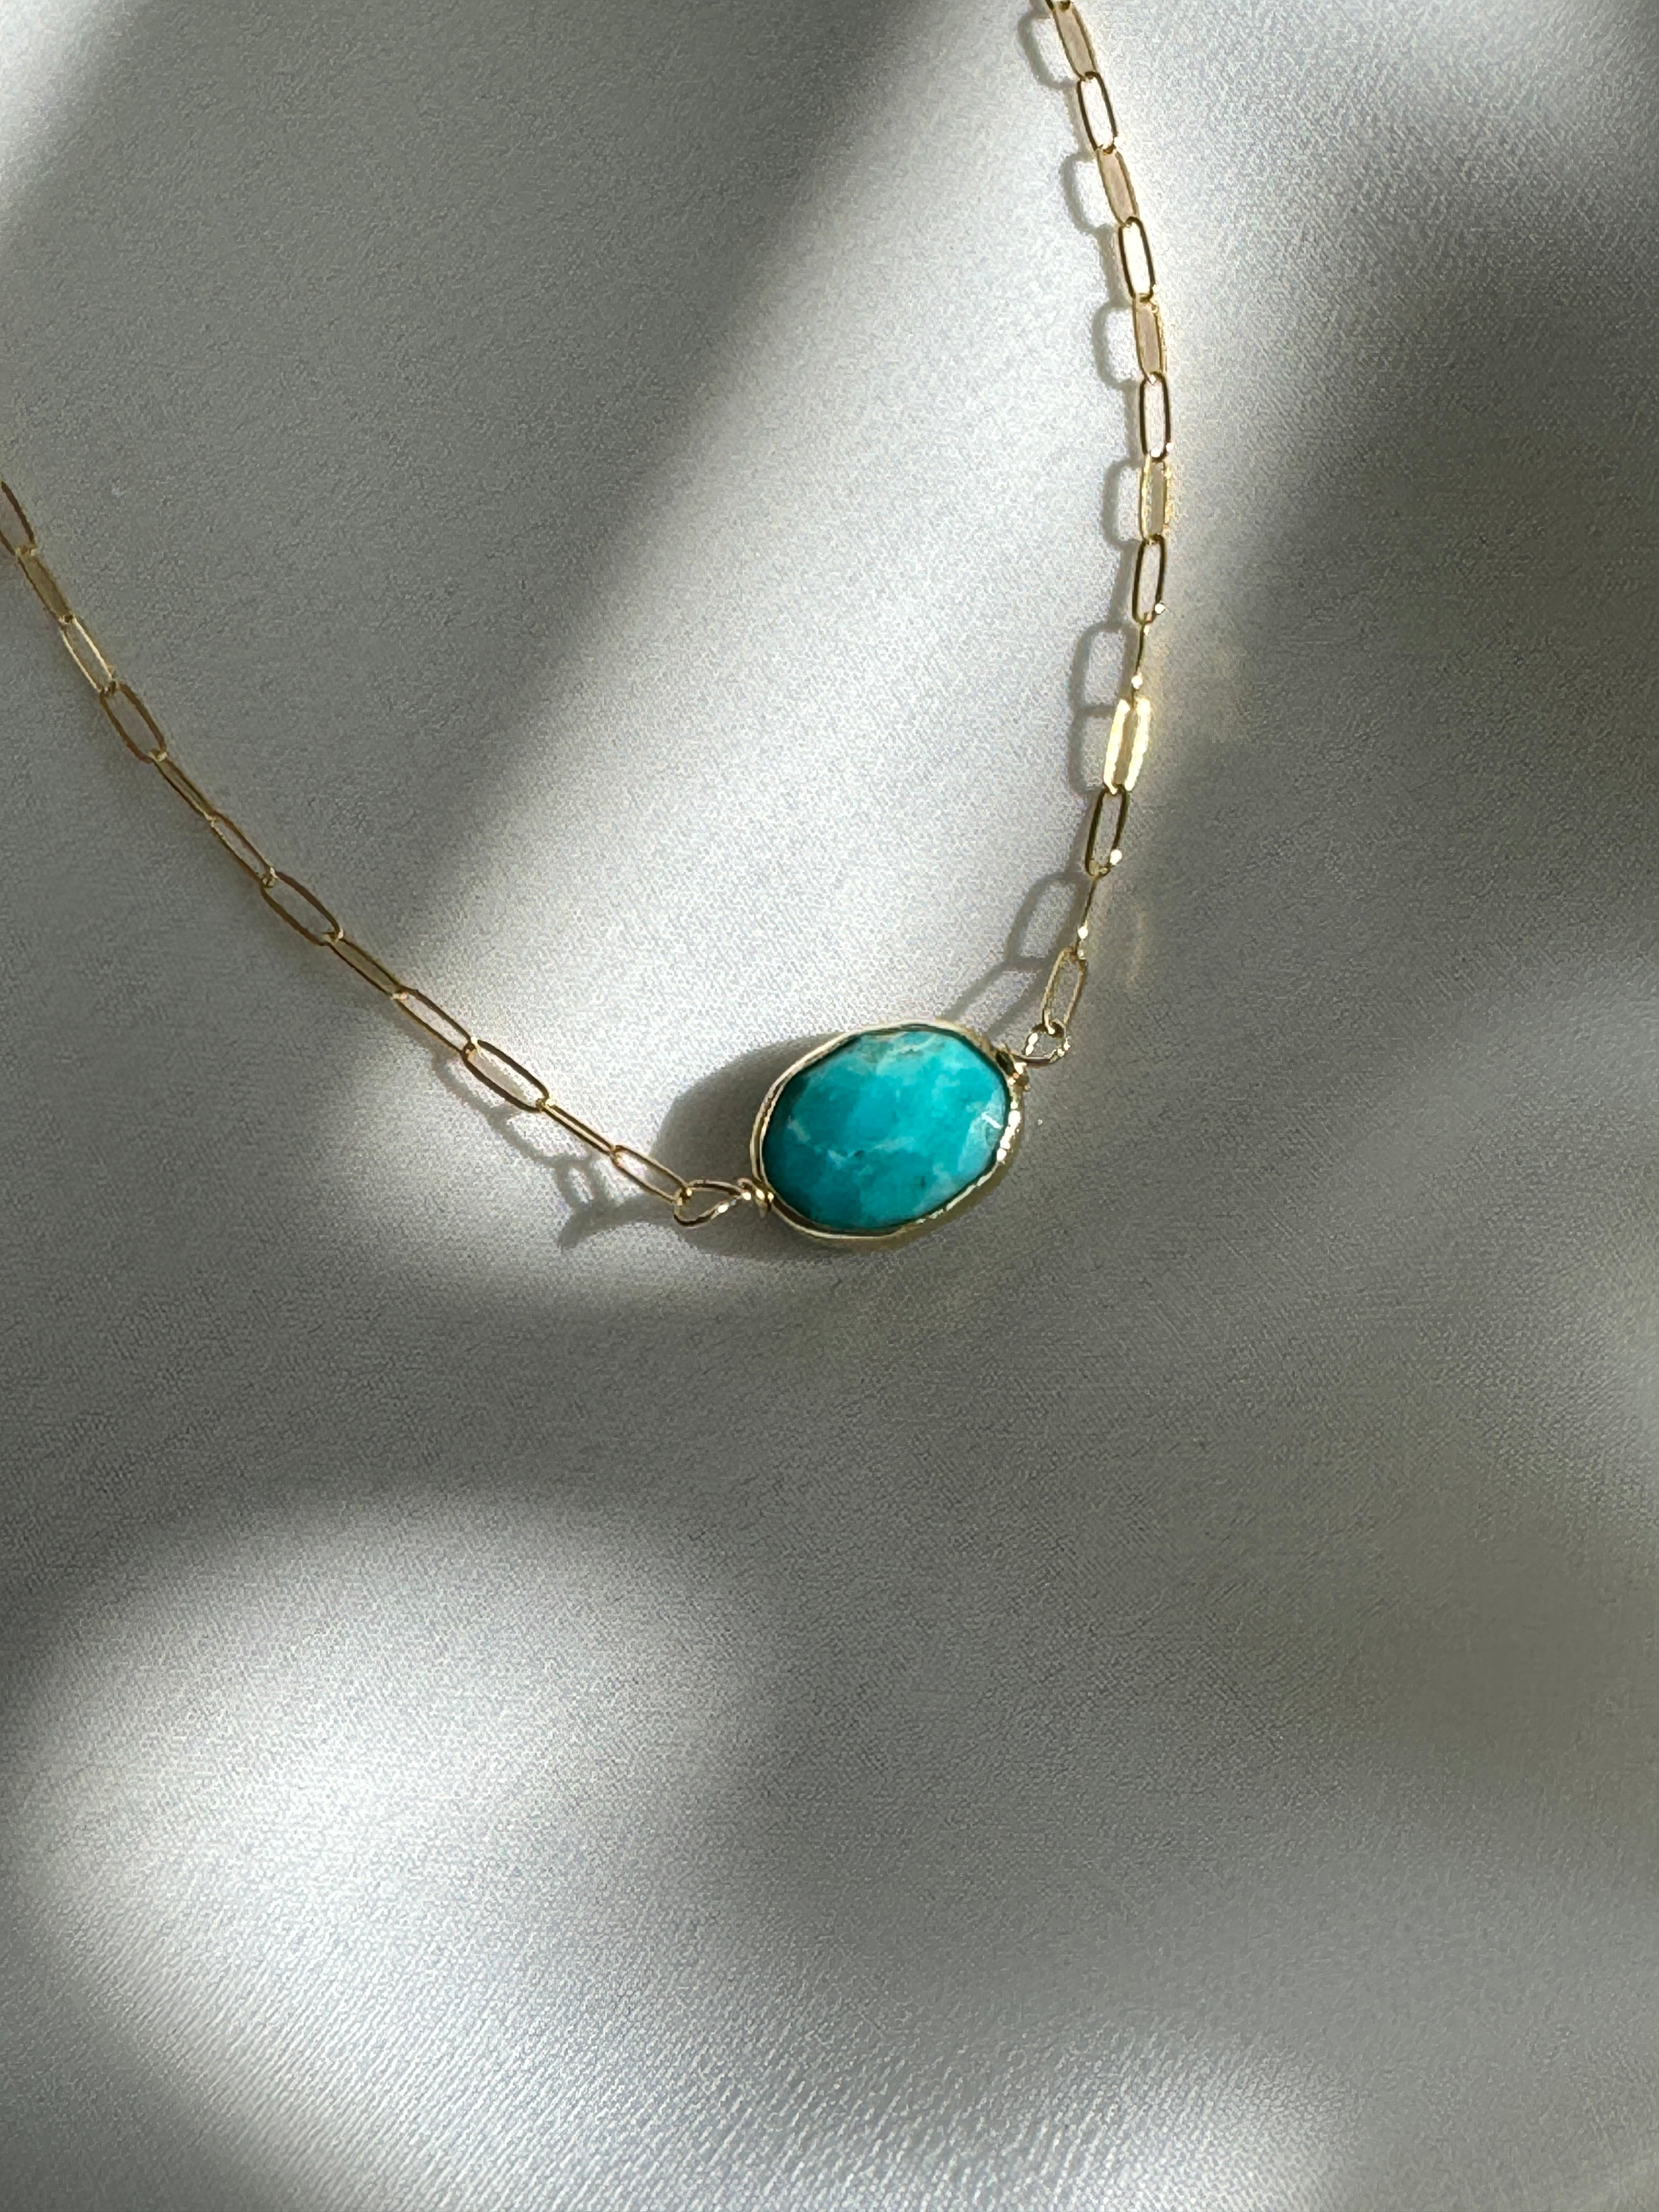 The Turquoise Nugget Necklace